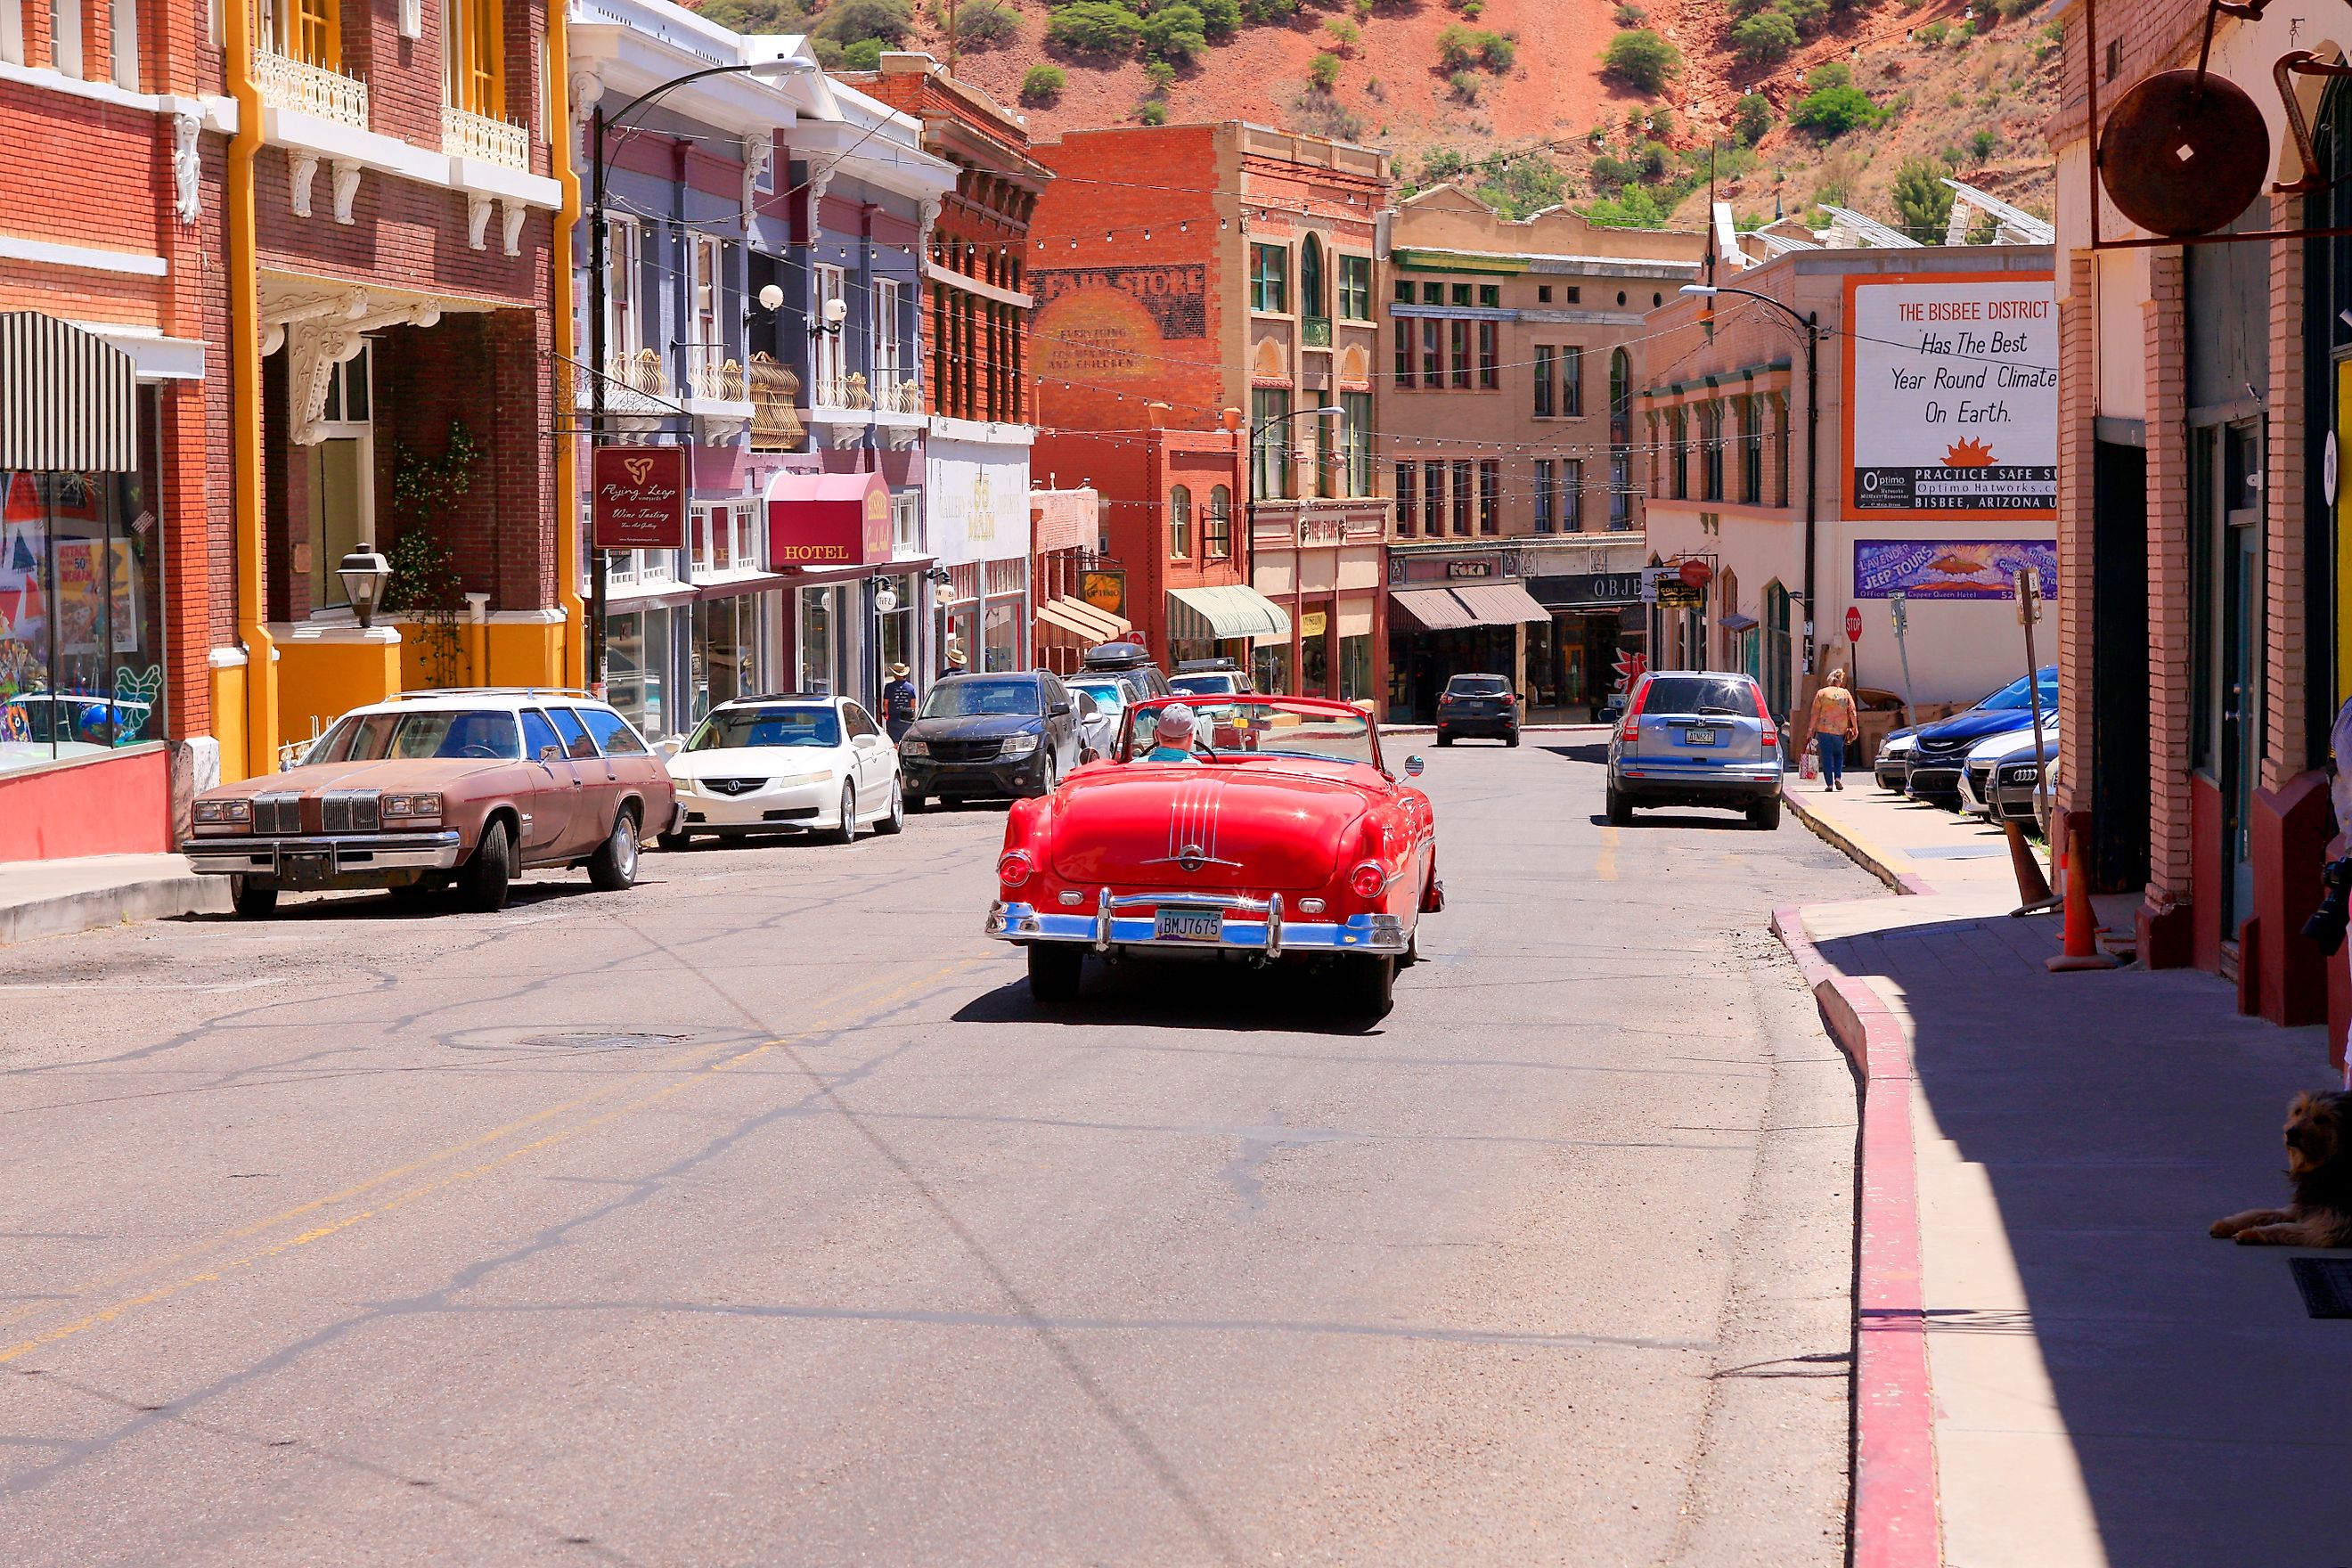 Businesses on Main Street also called Tombstone Canyon Road in the thriving heart of downtown historic Bisbee, AZ